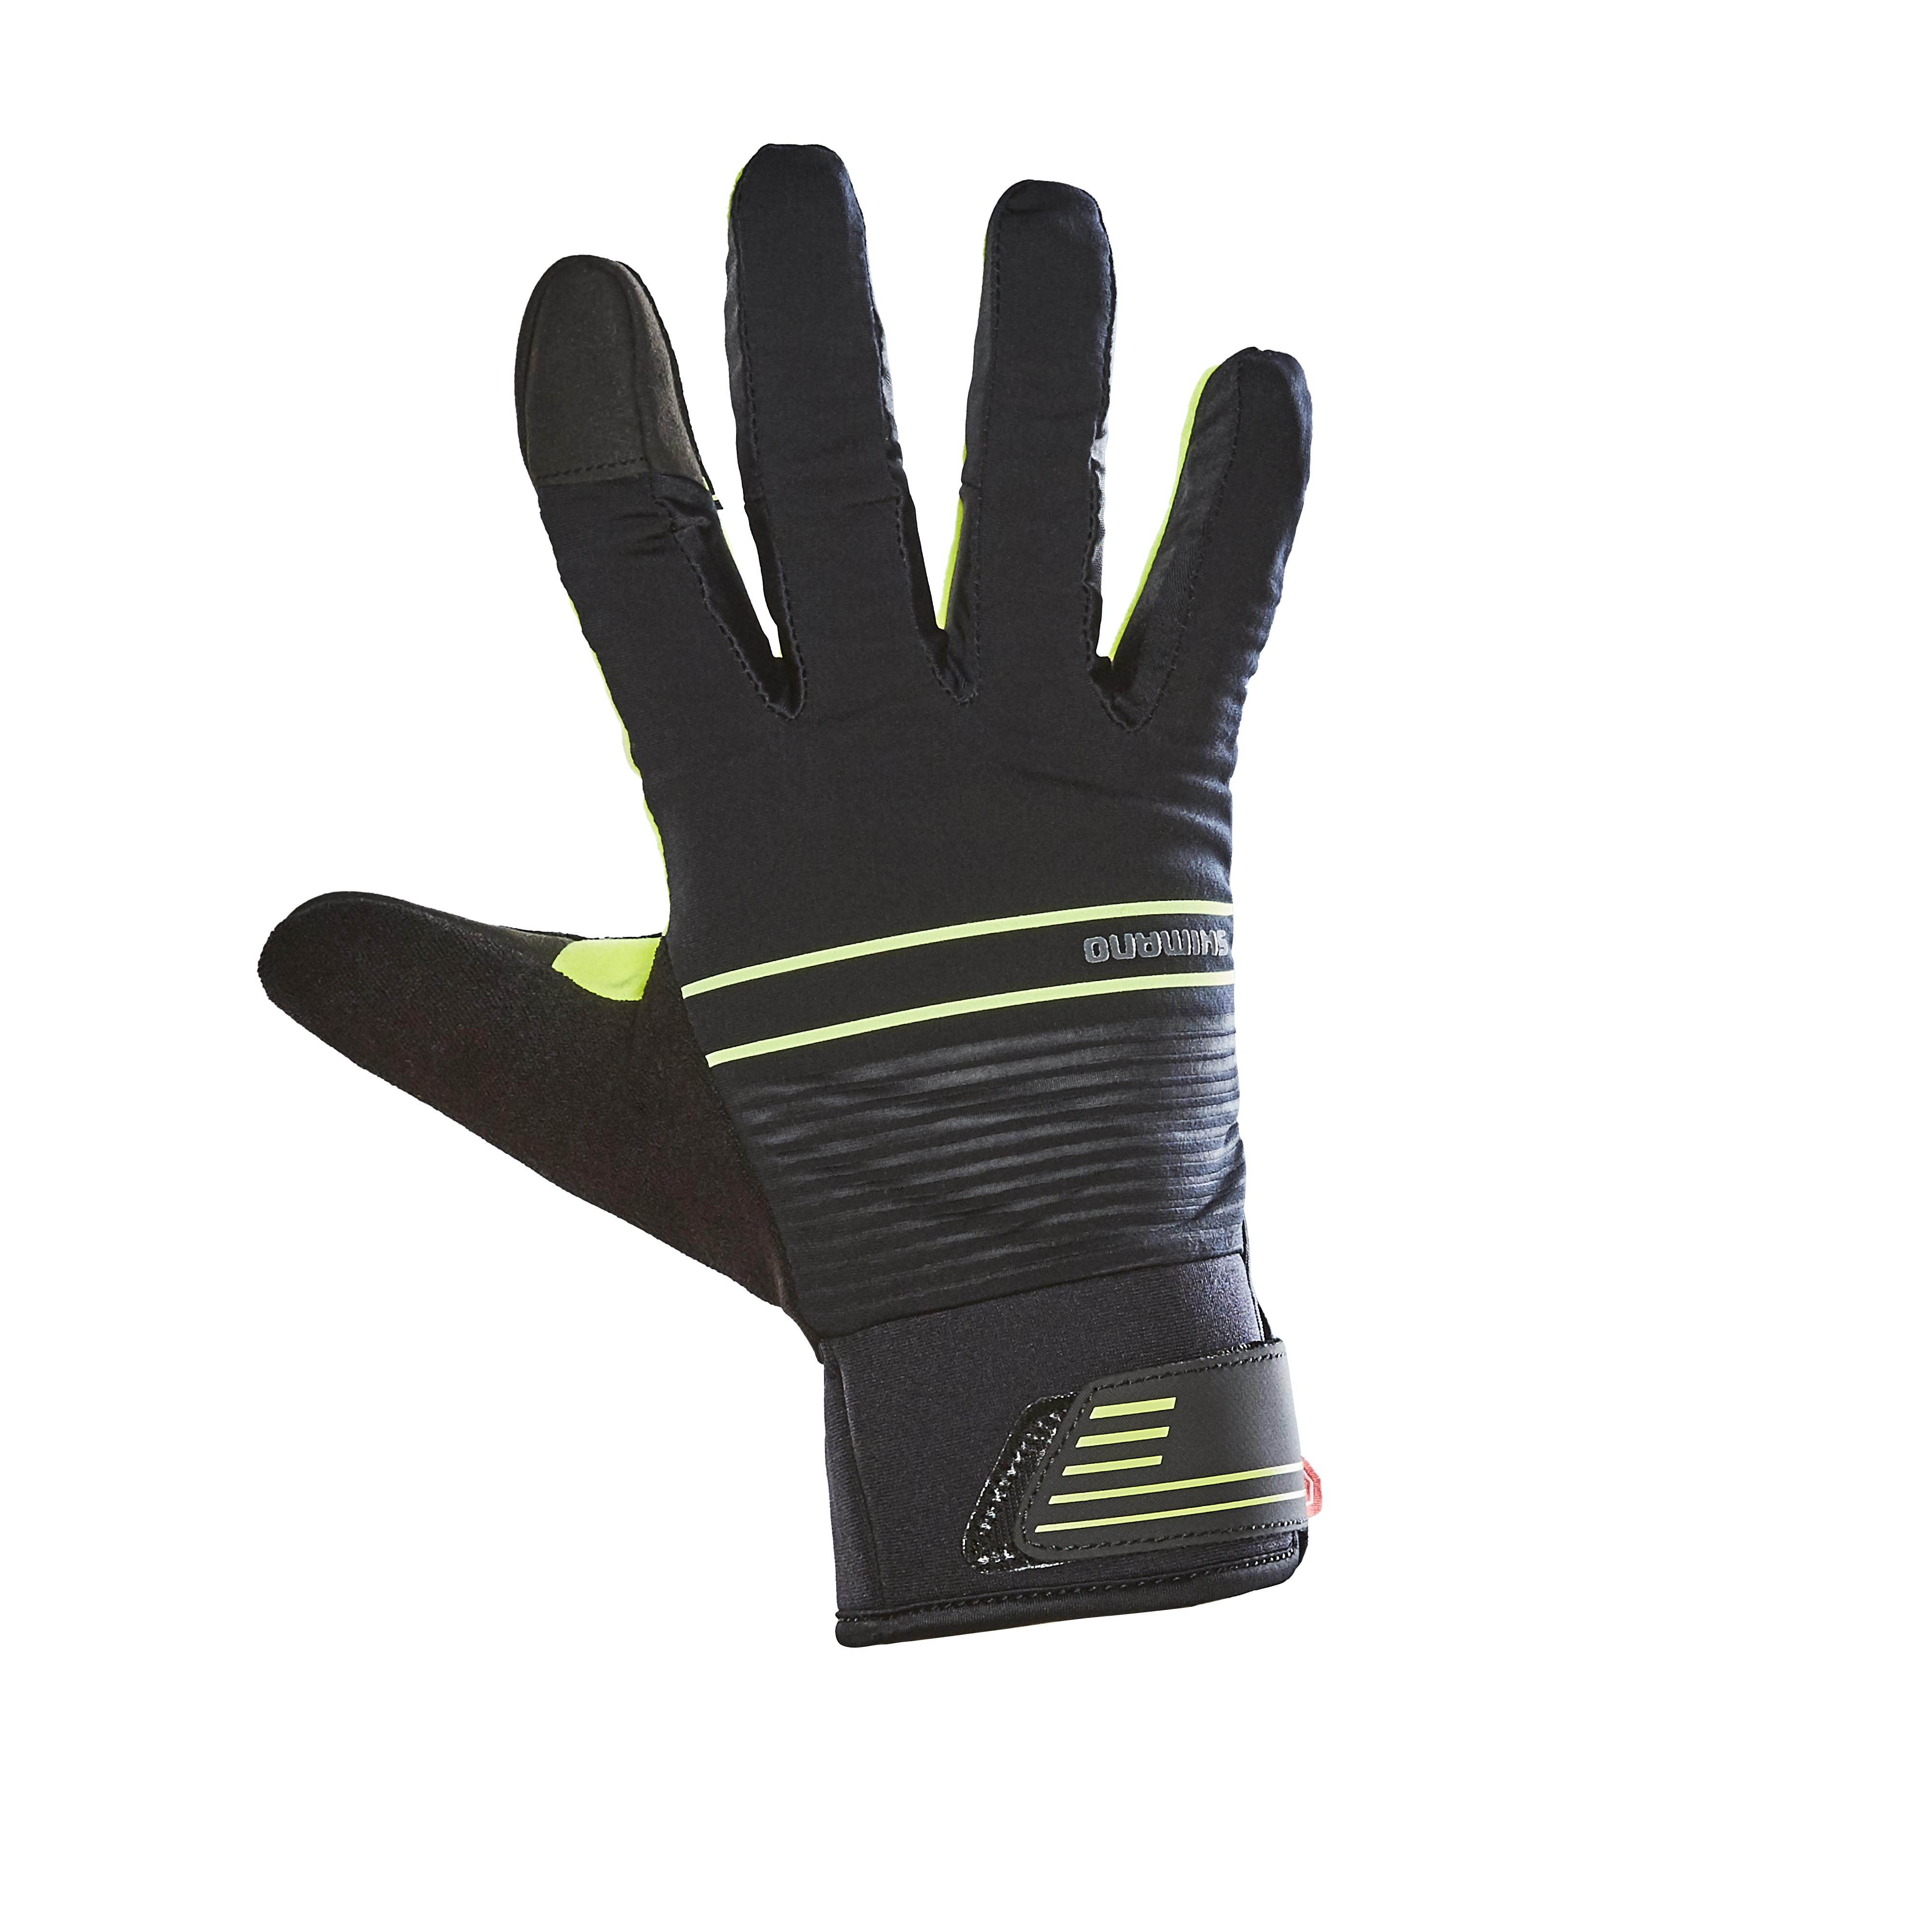 windstopper gloves cycling